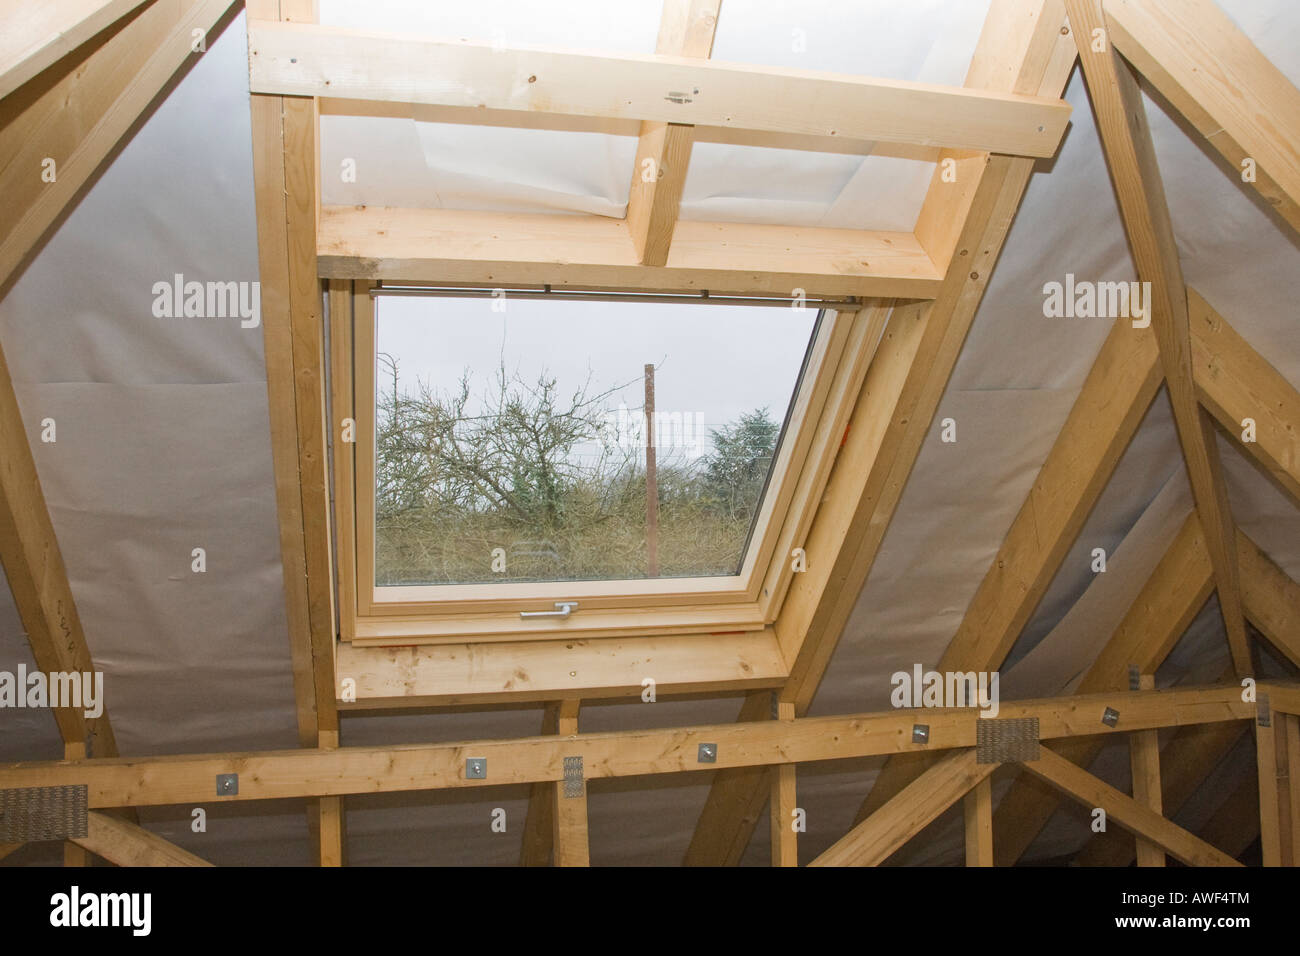 Velux roof window fits in a loft conversion being built Stock Photo